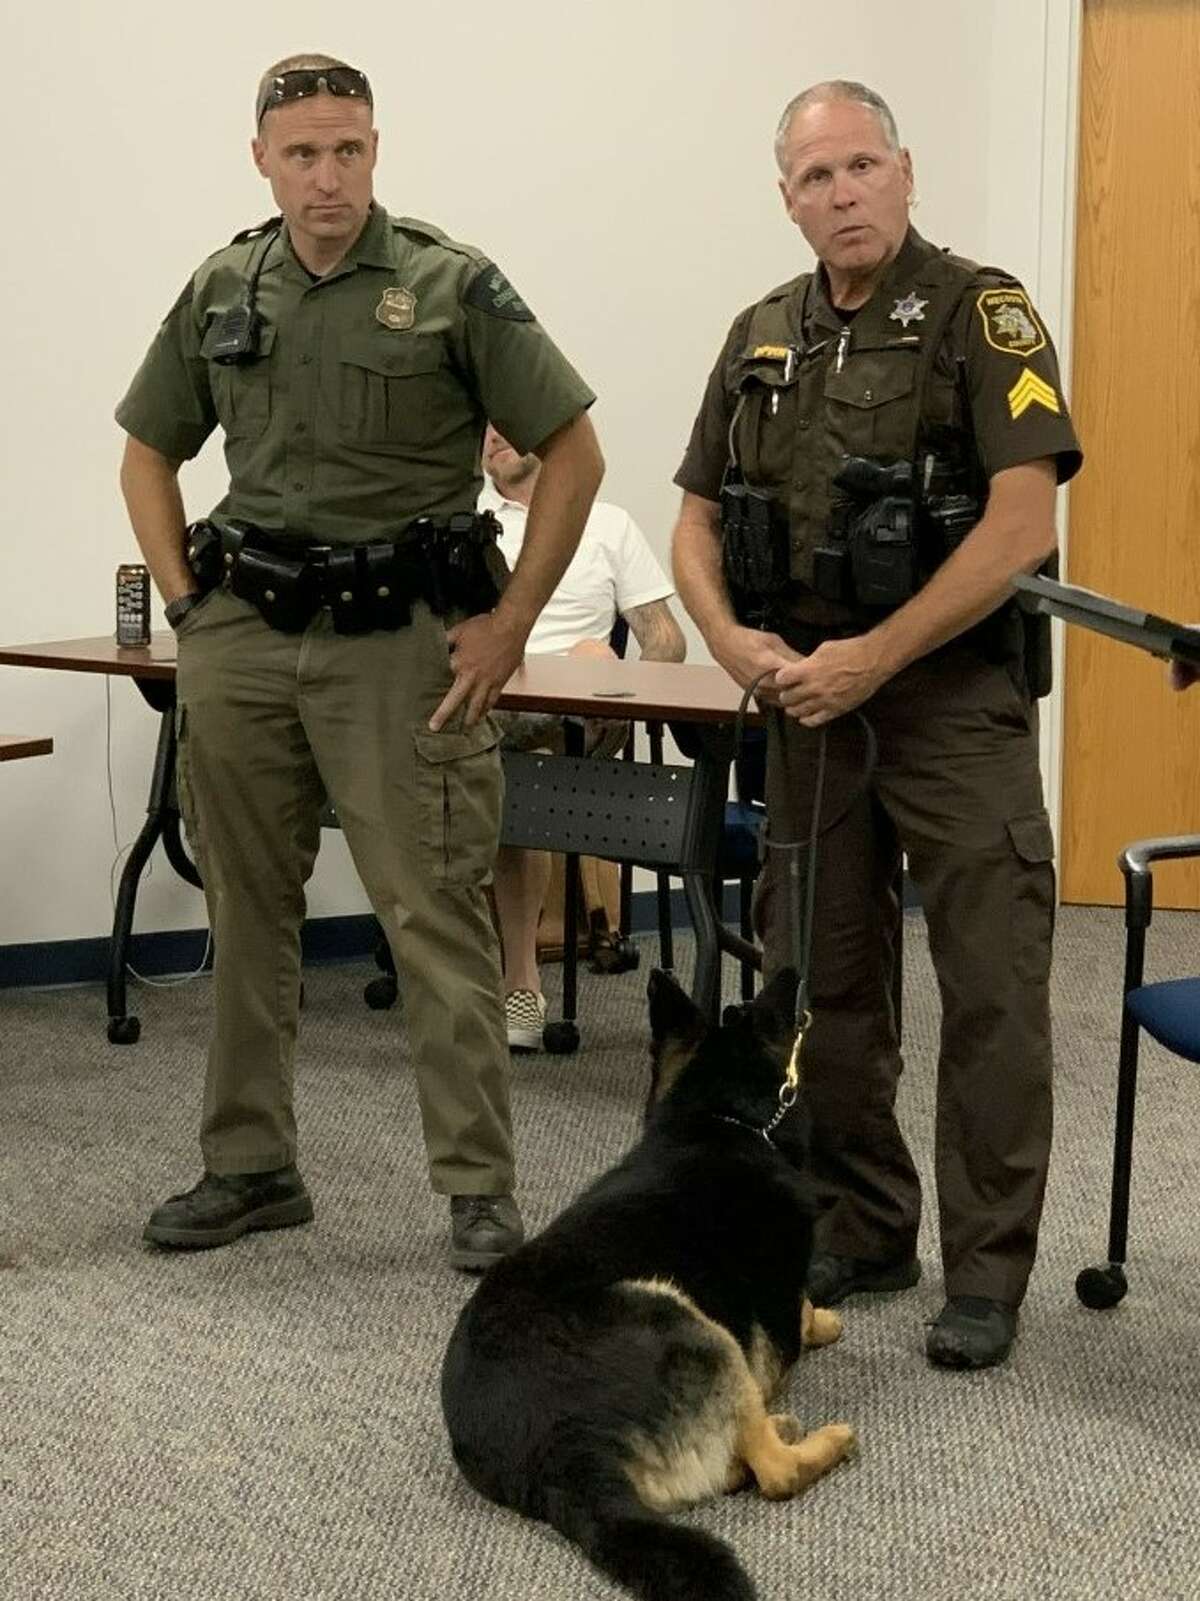 Mecosta County Deputy Sgt. Charley Pippin and K9 Deputy Zeke, along with conservation office Josh Reed, were presented with outstanding service awards by Sheriff Brian Miller recently. Detective Mike Mohr was presented the award in absentia.